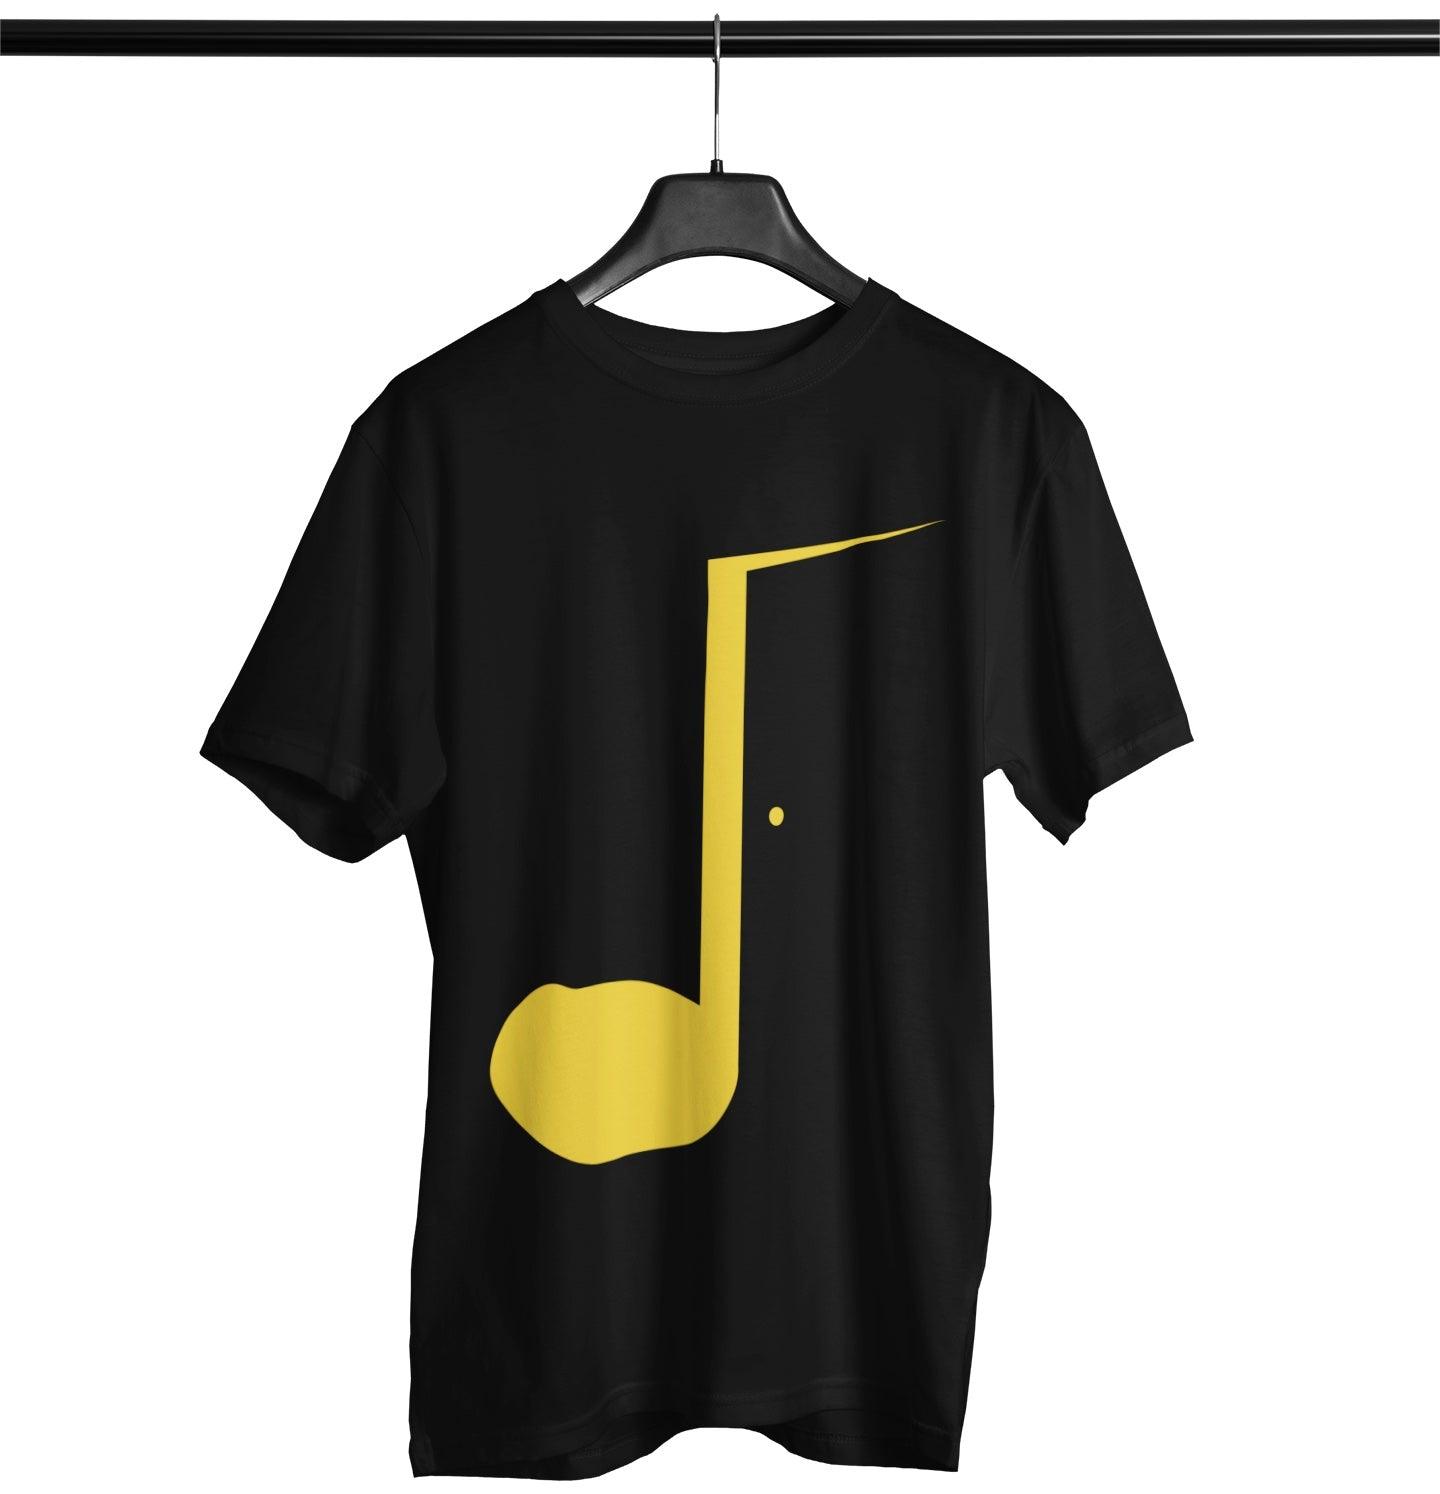 Door Music Note Softstyle T-Shirt | Techno Outfit